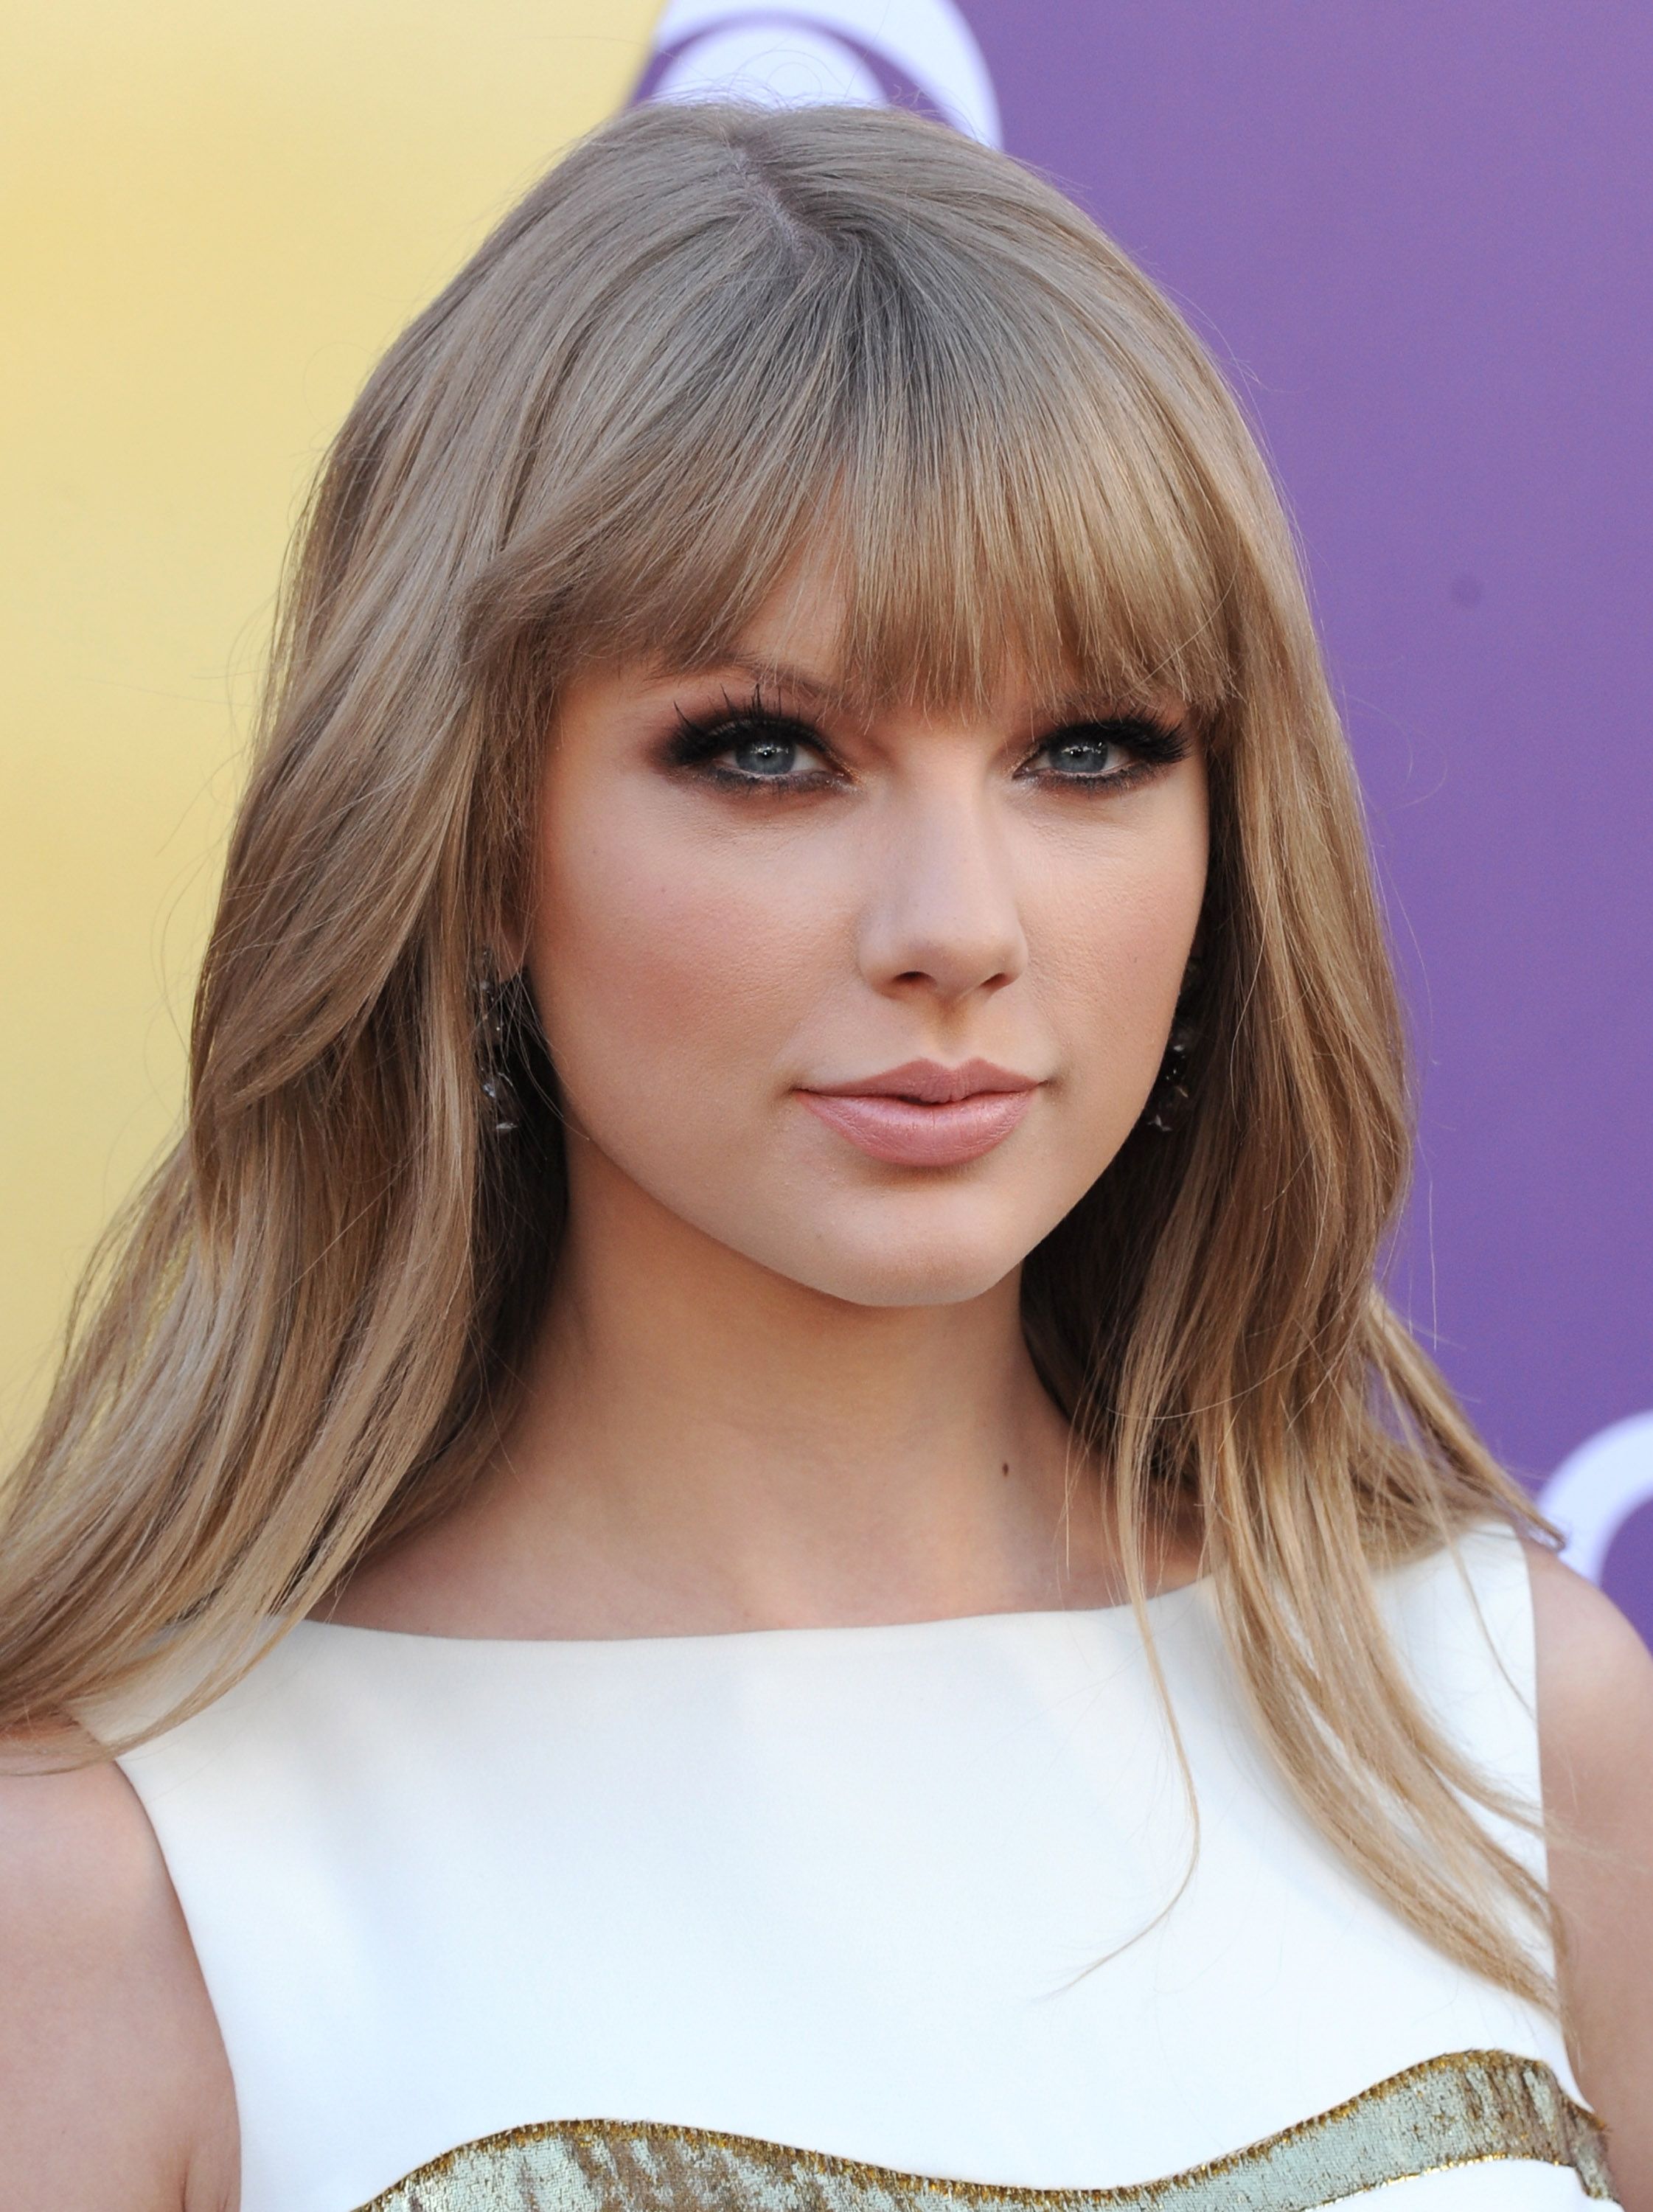 The Top 50 Taylor Swift Best Songs Ranked From Worst To Best